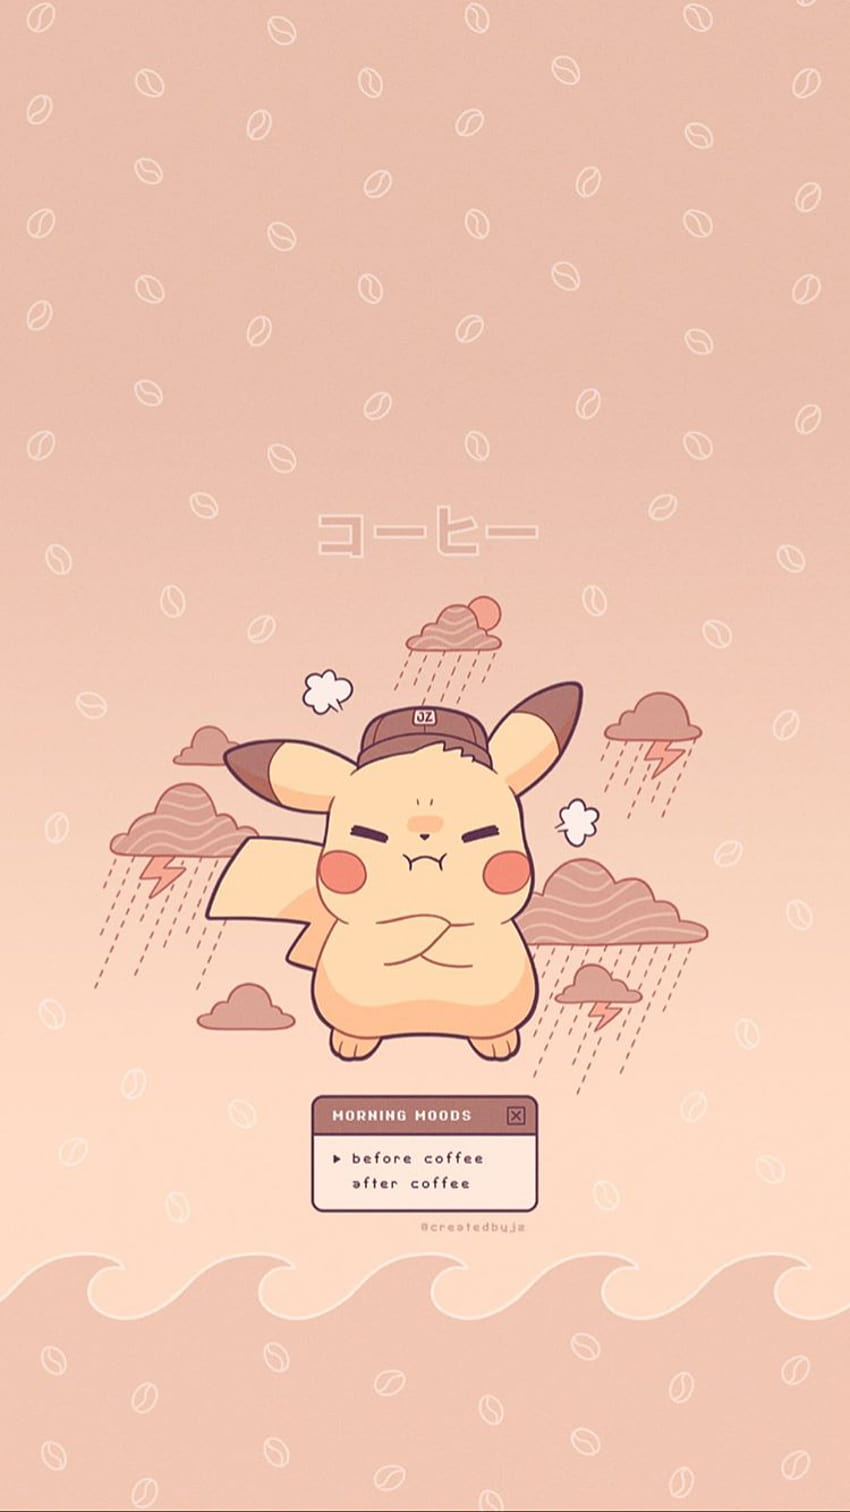 IPhone wallpaper with a cartoon picture of a cute pikachu - Pokemon, Pikachu